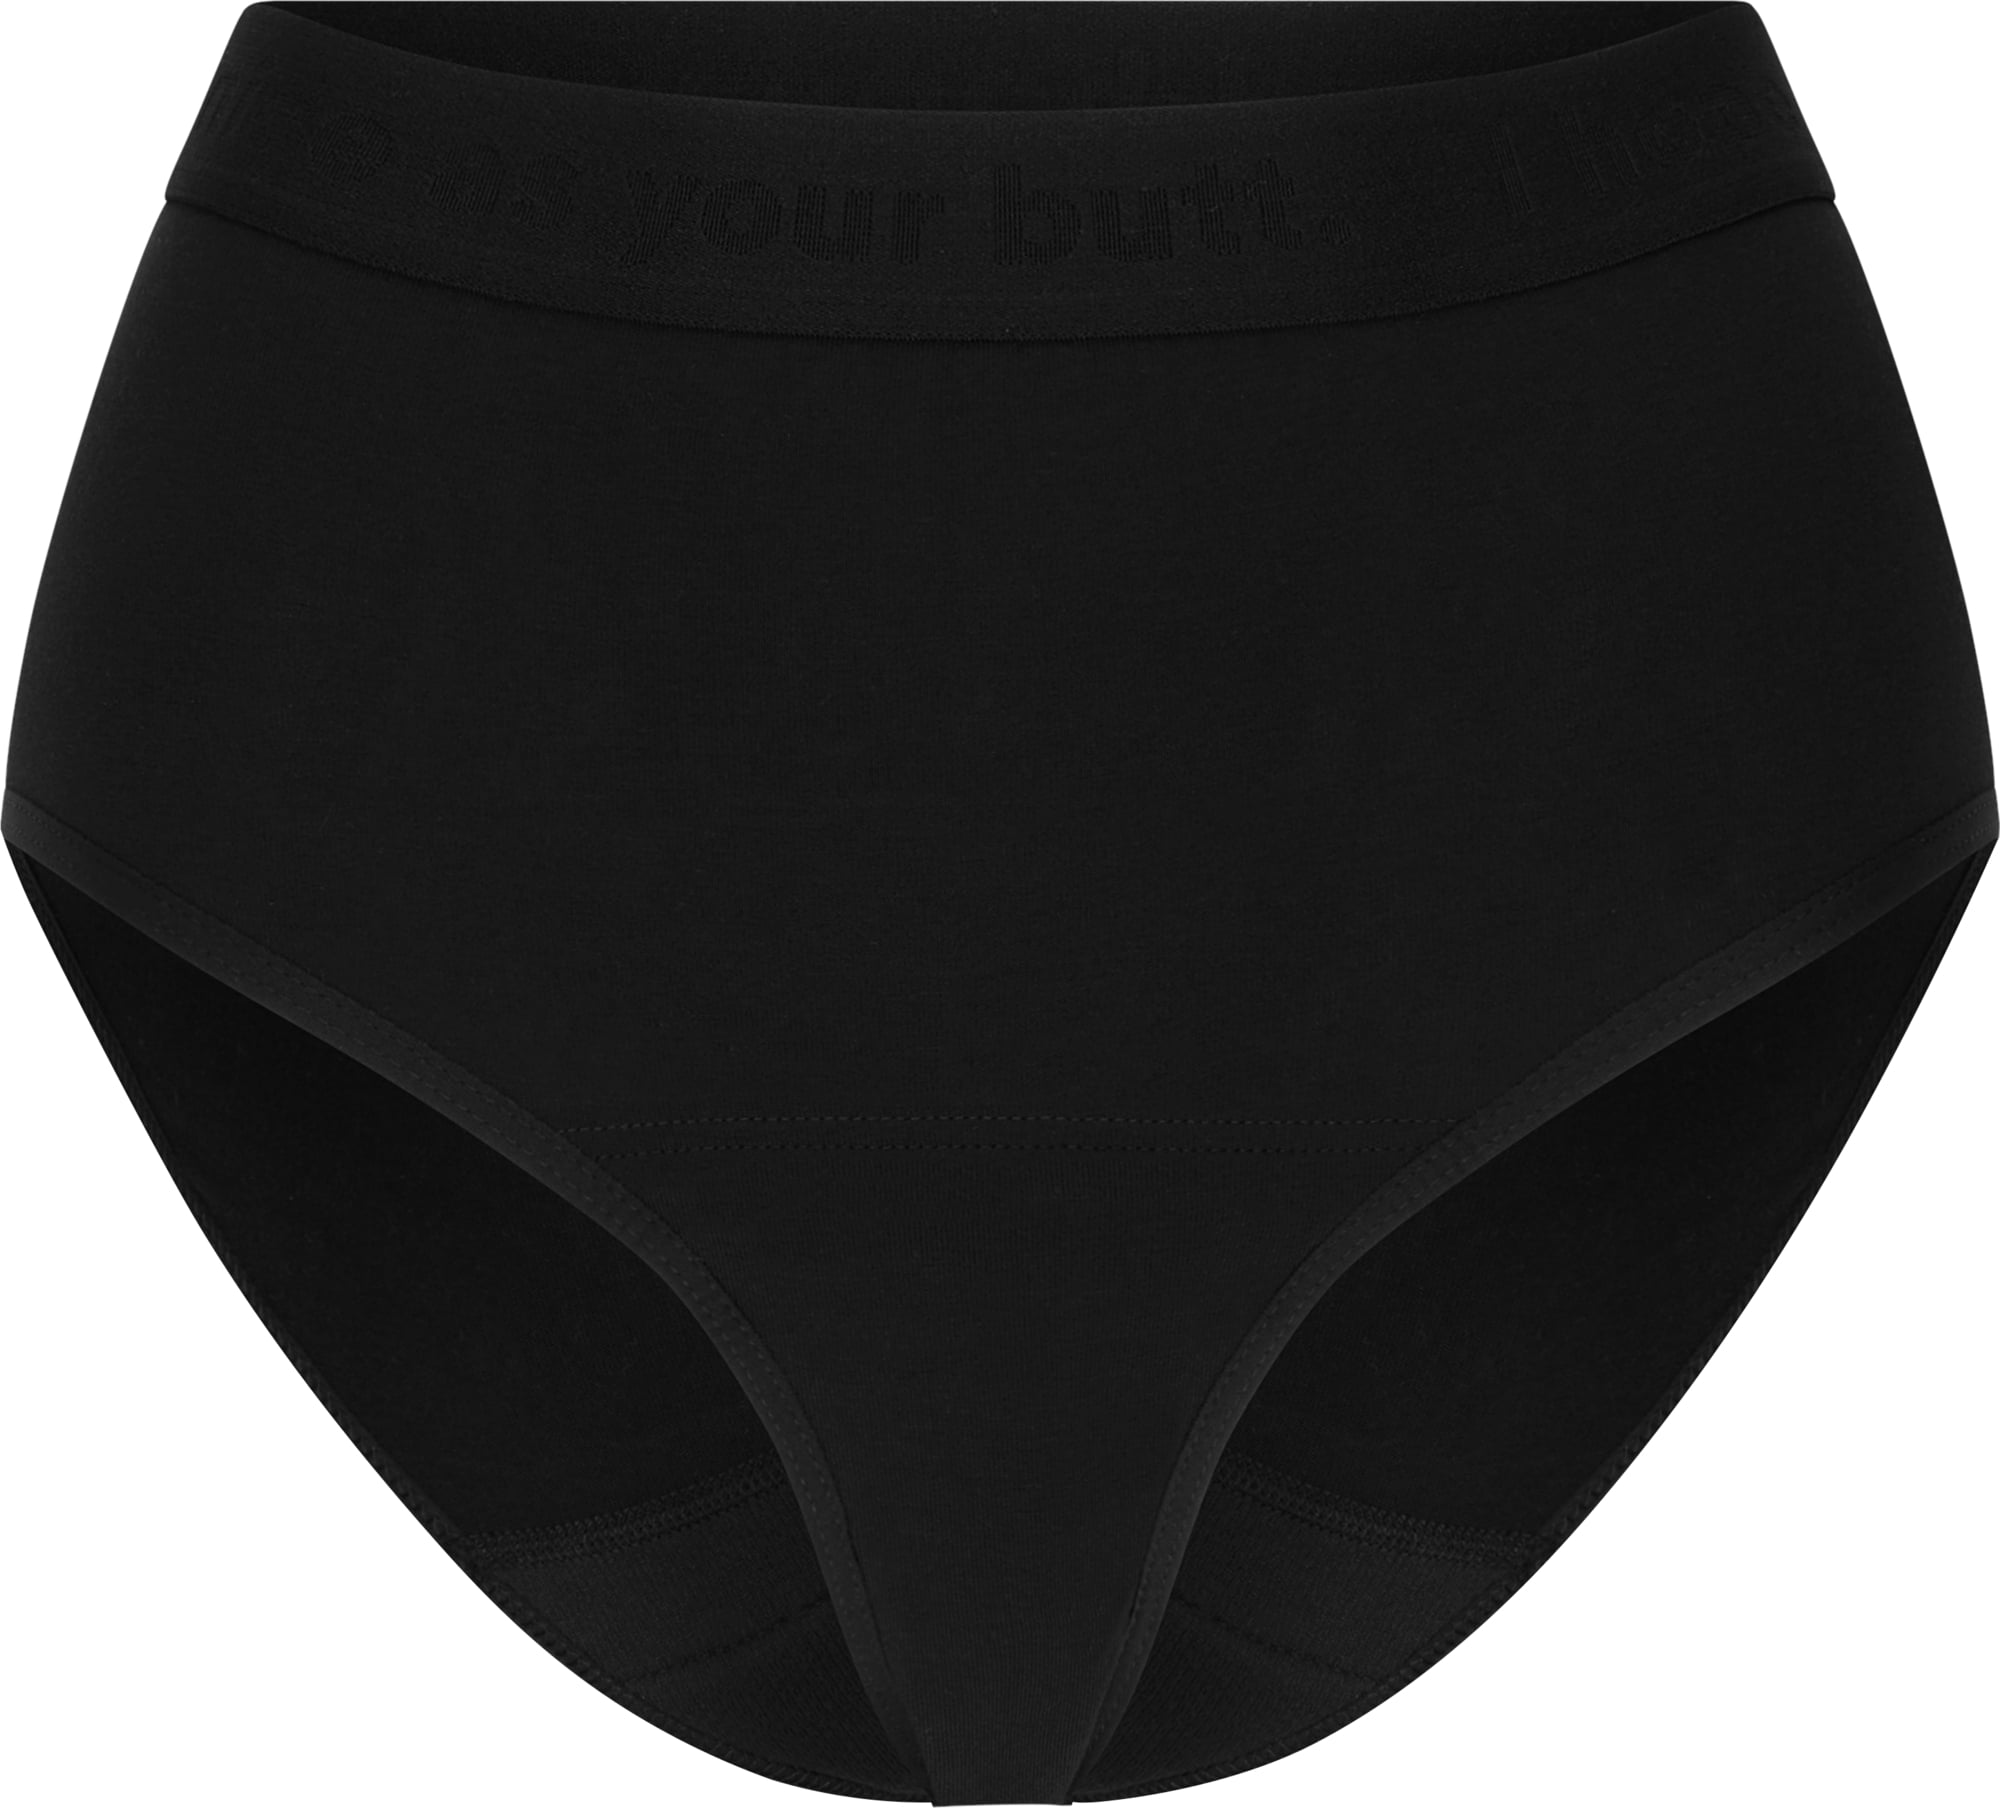 The Female Company Period Underwear - High Waist Basic Black Extra Strong -  Ecco Verde